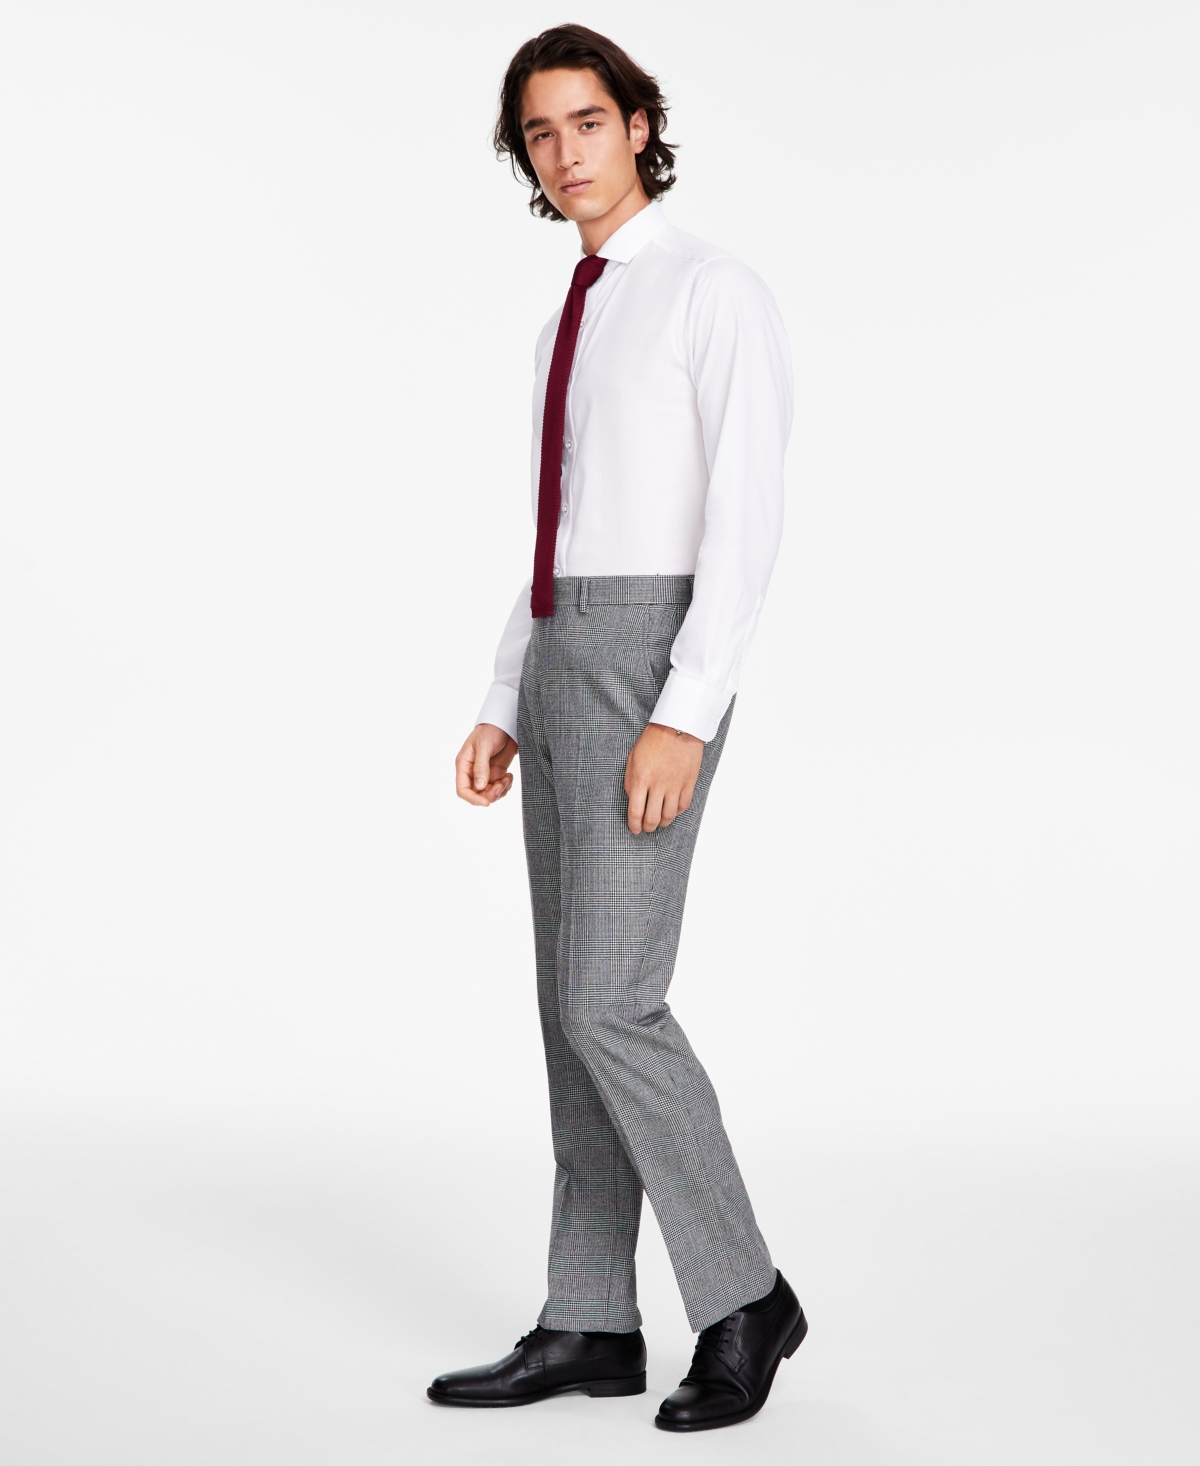 Bar Iii Men's Slim-fit Black/white Plaid Suit Pants, Created For Macy's In Black  White